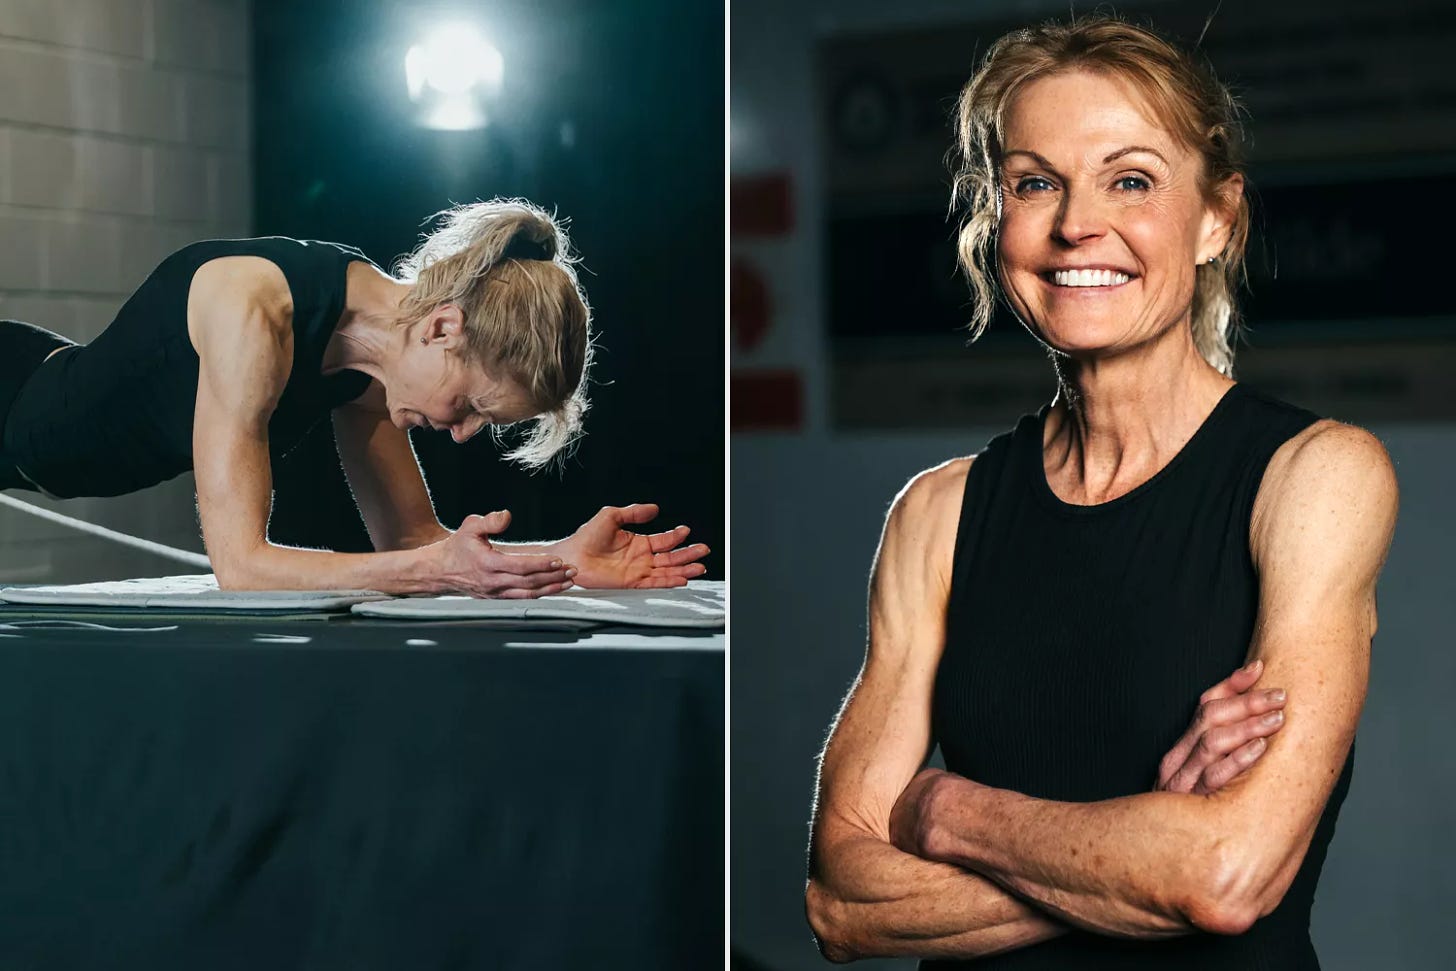 DonnaJean Wilde, 58, grandmother from Alberta, Canada, has broken the world record for the longest time in an abdominal plank position